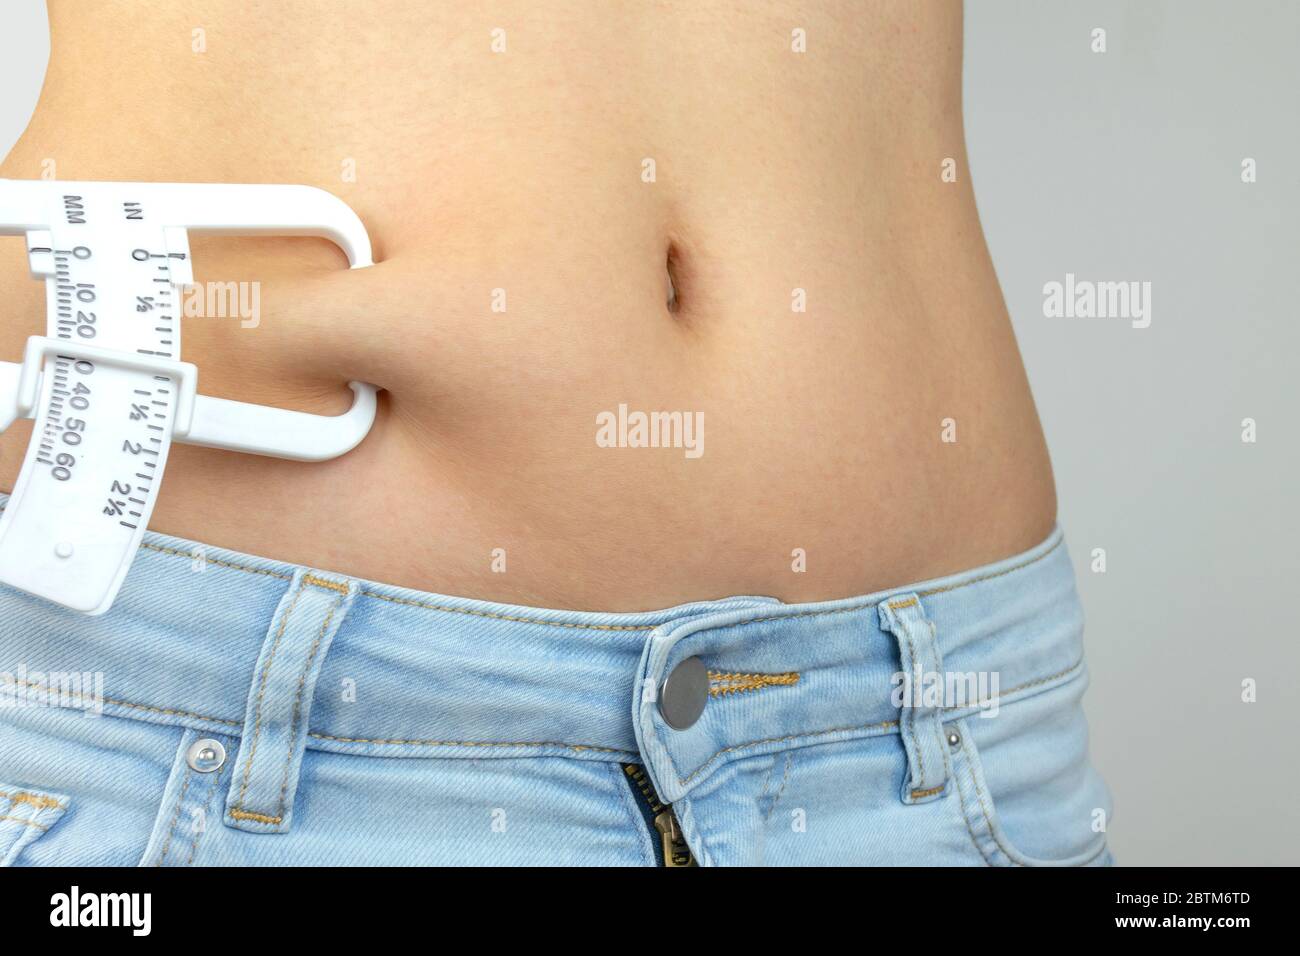 https://c8.alamy.com/comp/2BTM6TD/body-fat-calipers-woman-measuring-subcutaneous-percentage-of-fat-on-her-belly-young-woman-using-skinfold-calipers-2BTM6TD.jpg